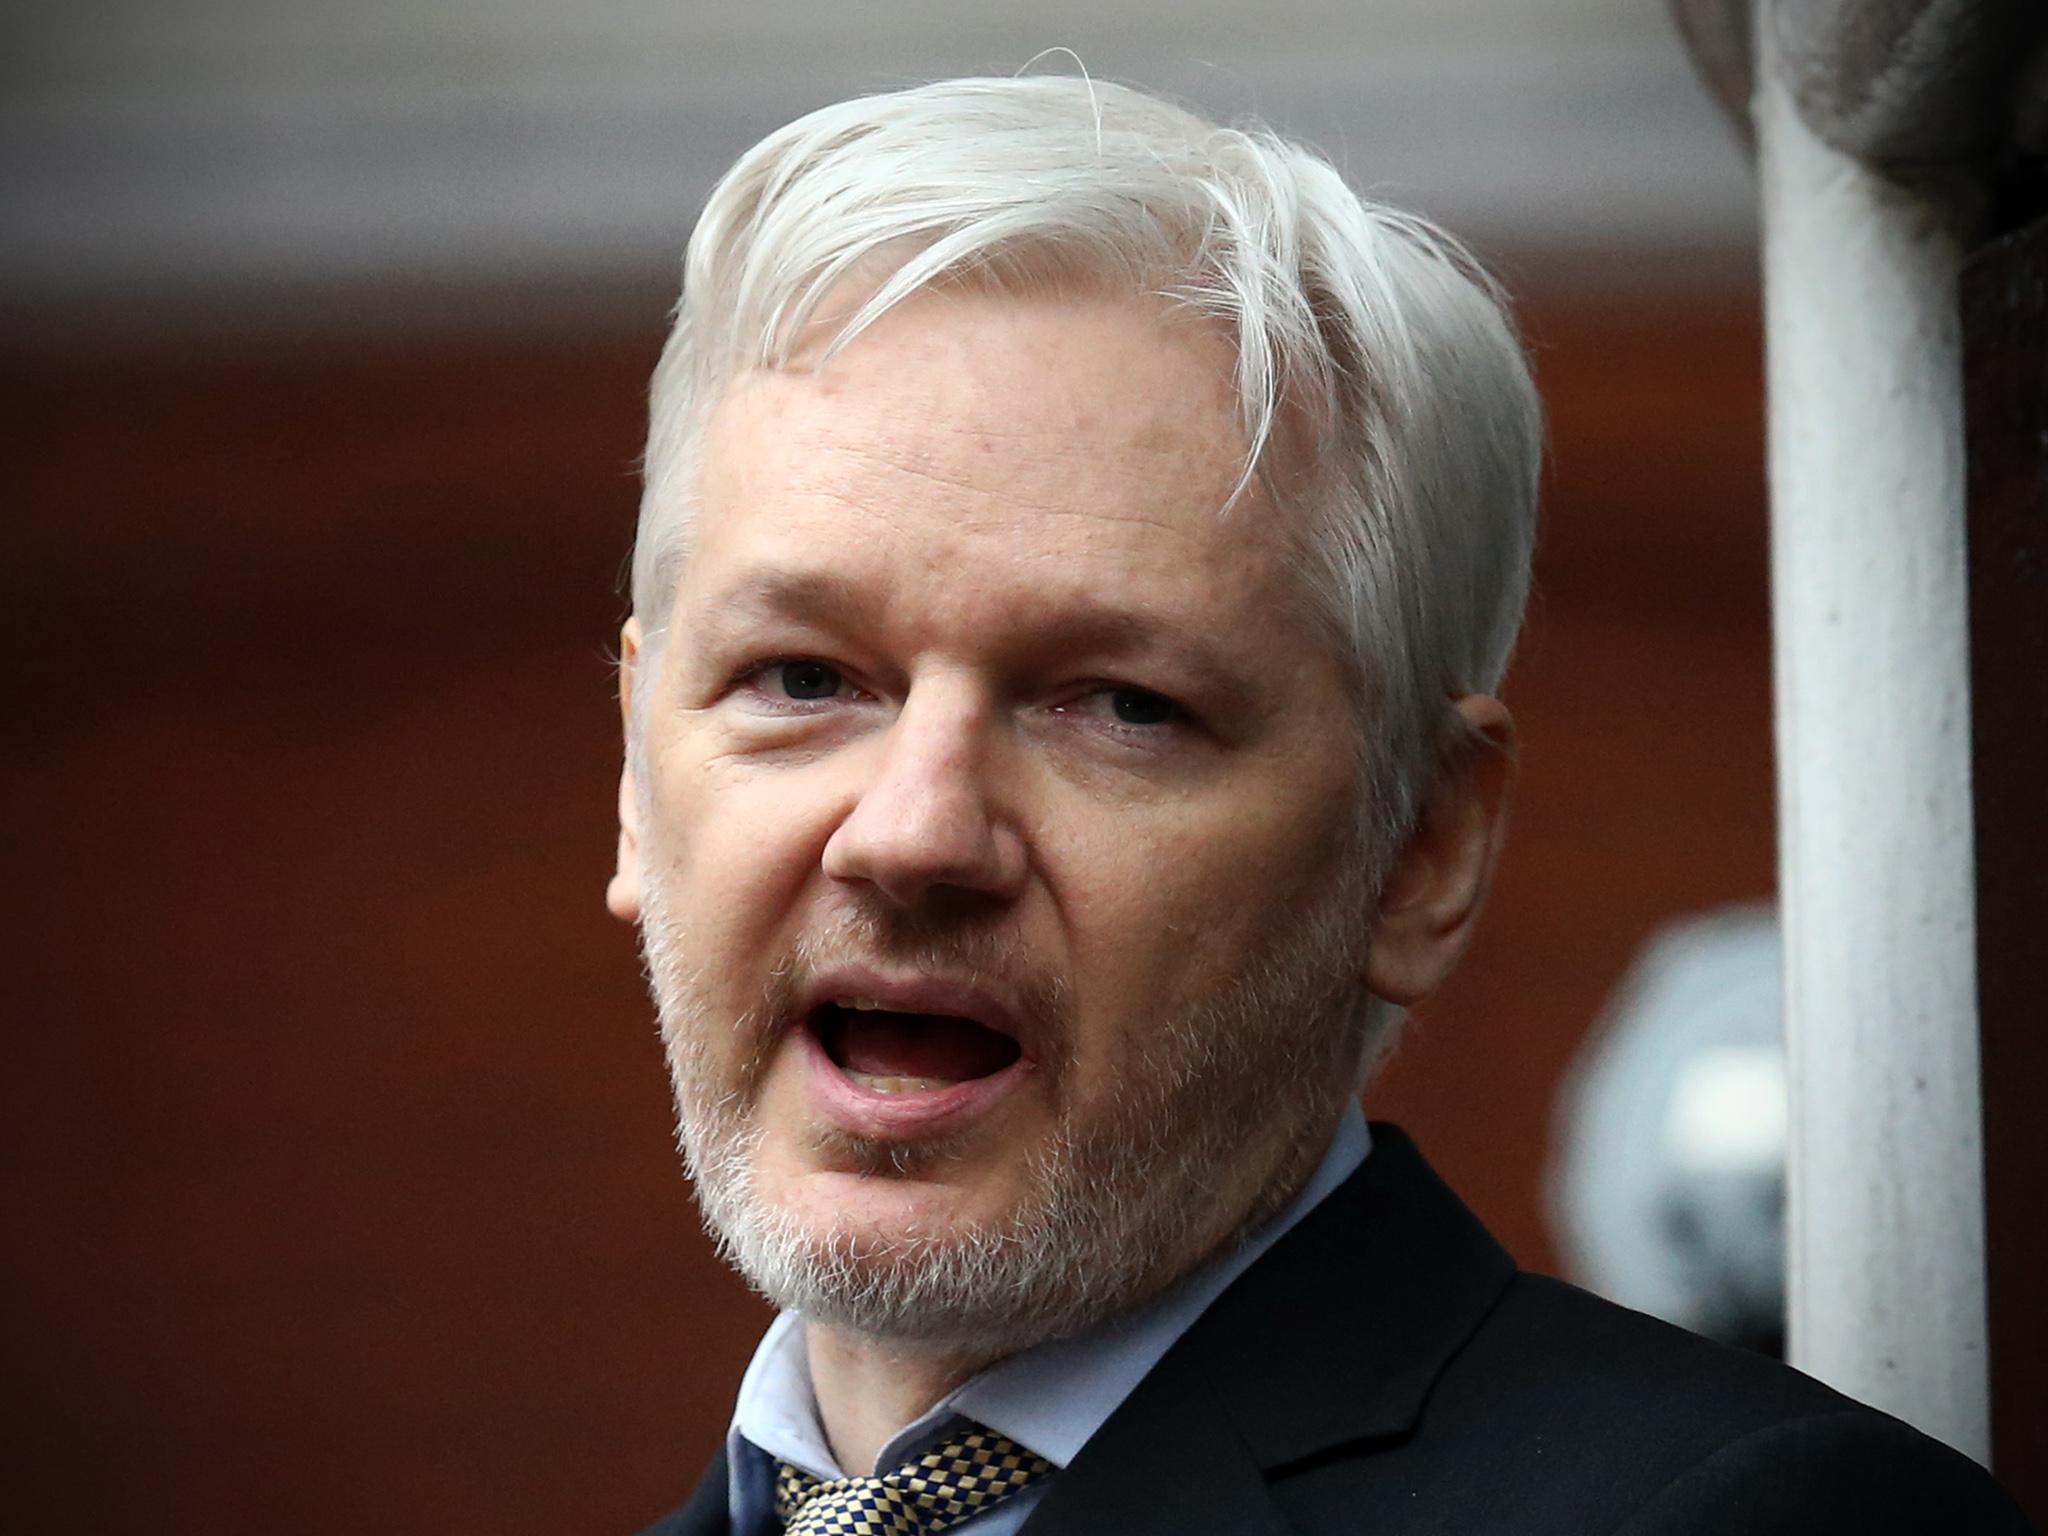 Wikileaks founder Julian Assange believes the same officials could have funded both the Clinton Foundation and Isis